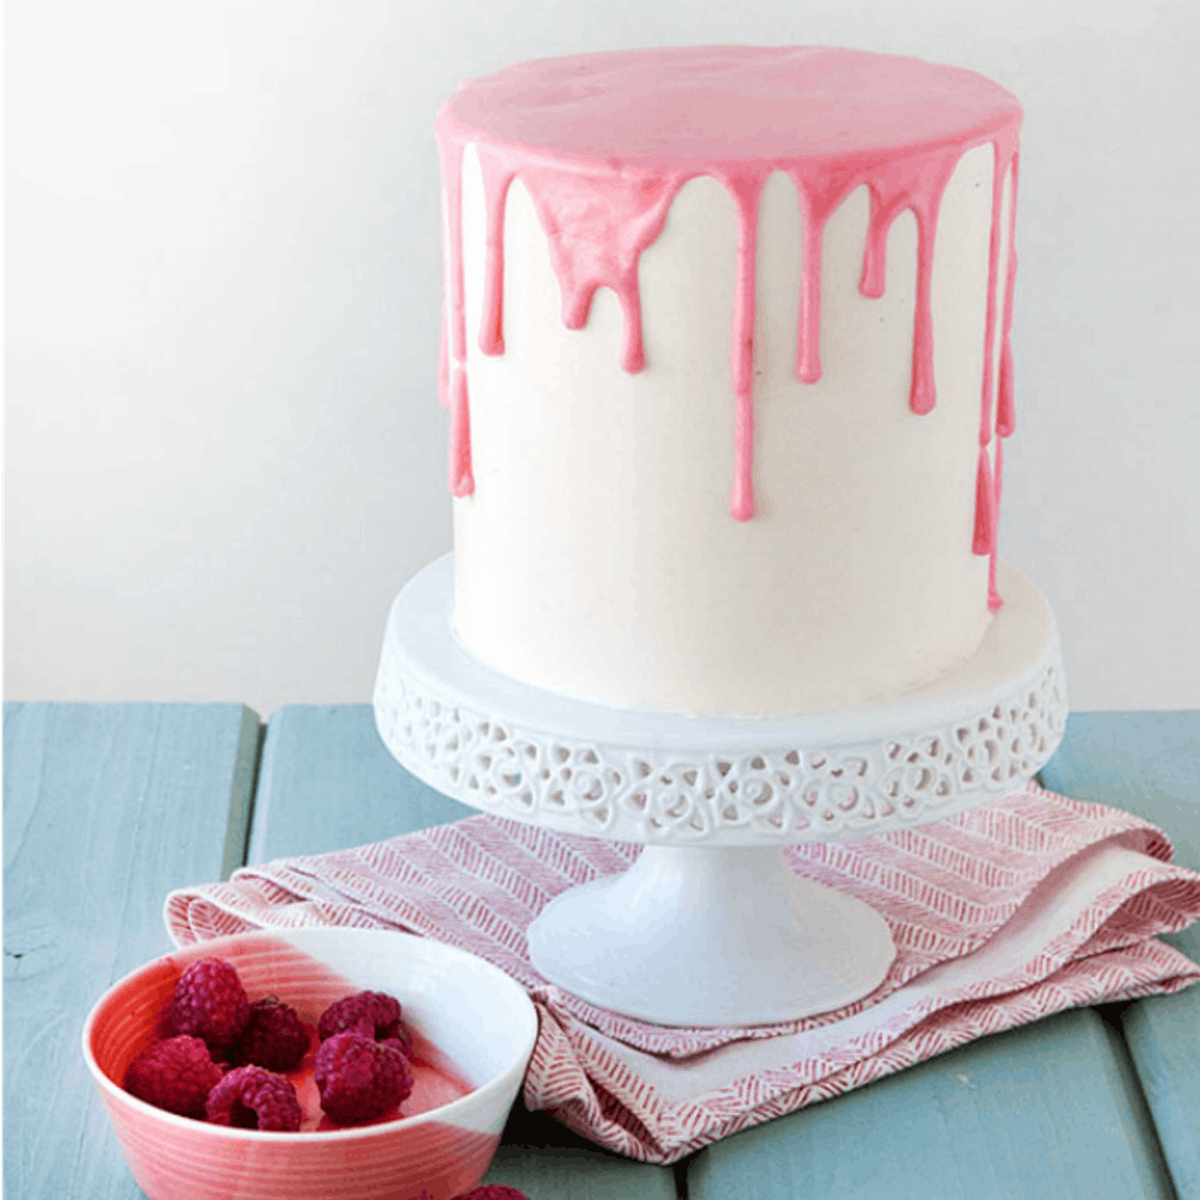 14 Drip Cake Recipes That Look As Good As They Taste